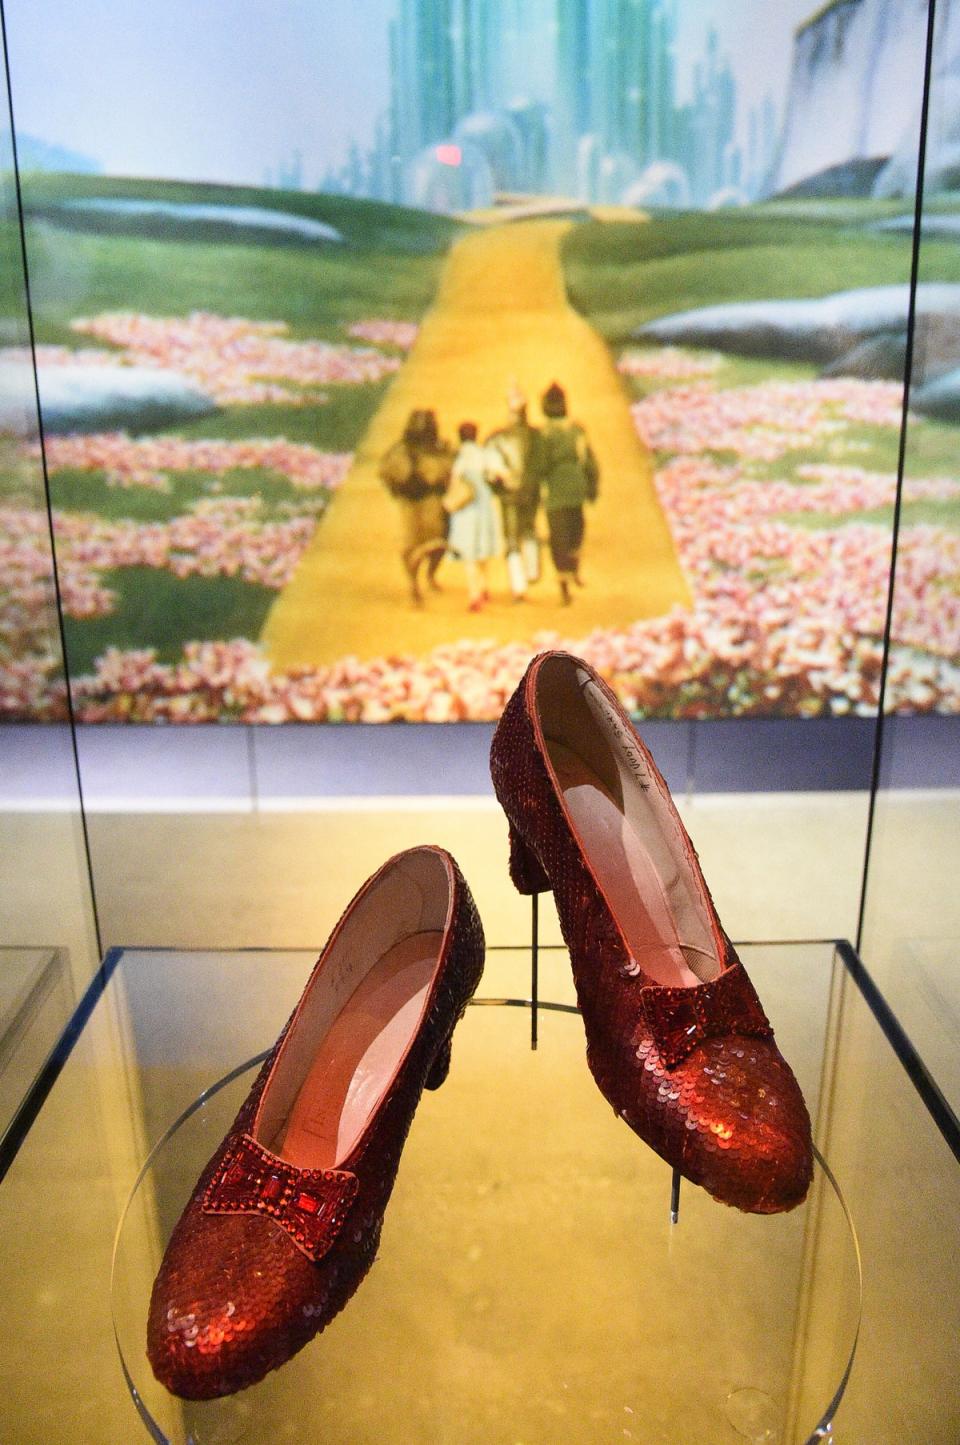 A pair of ruby slippers worn by Judy Garland in the Wizard of Oz on display at the Academy Museum in 2021 (Richard Shotwell/Invision/AP)